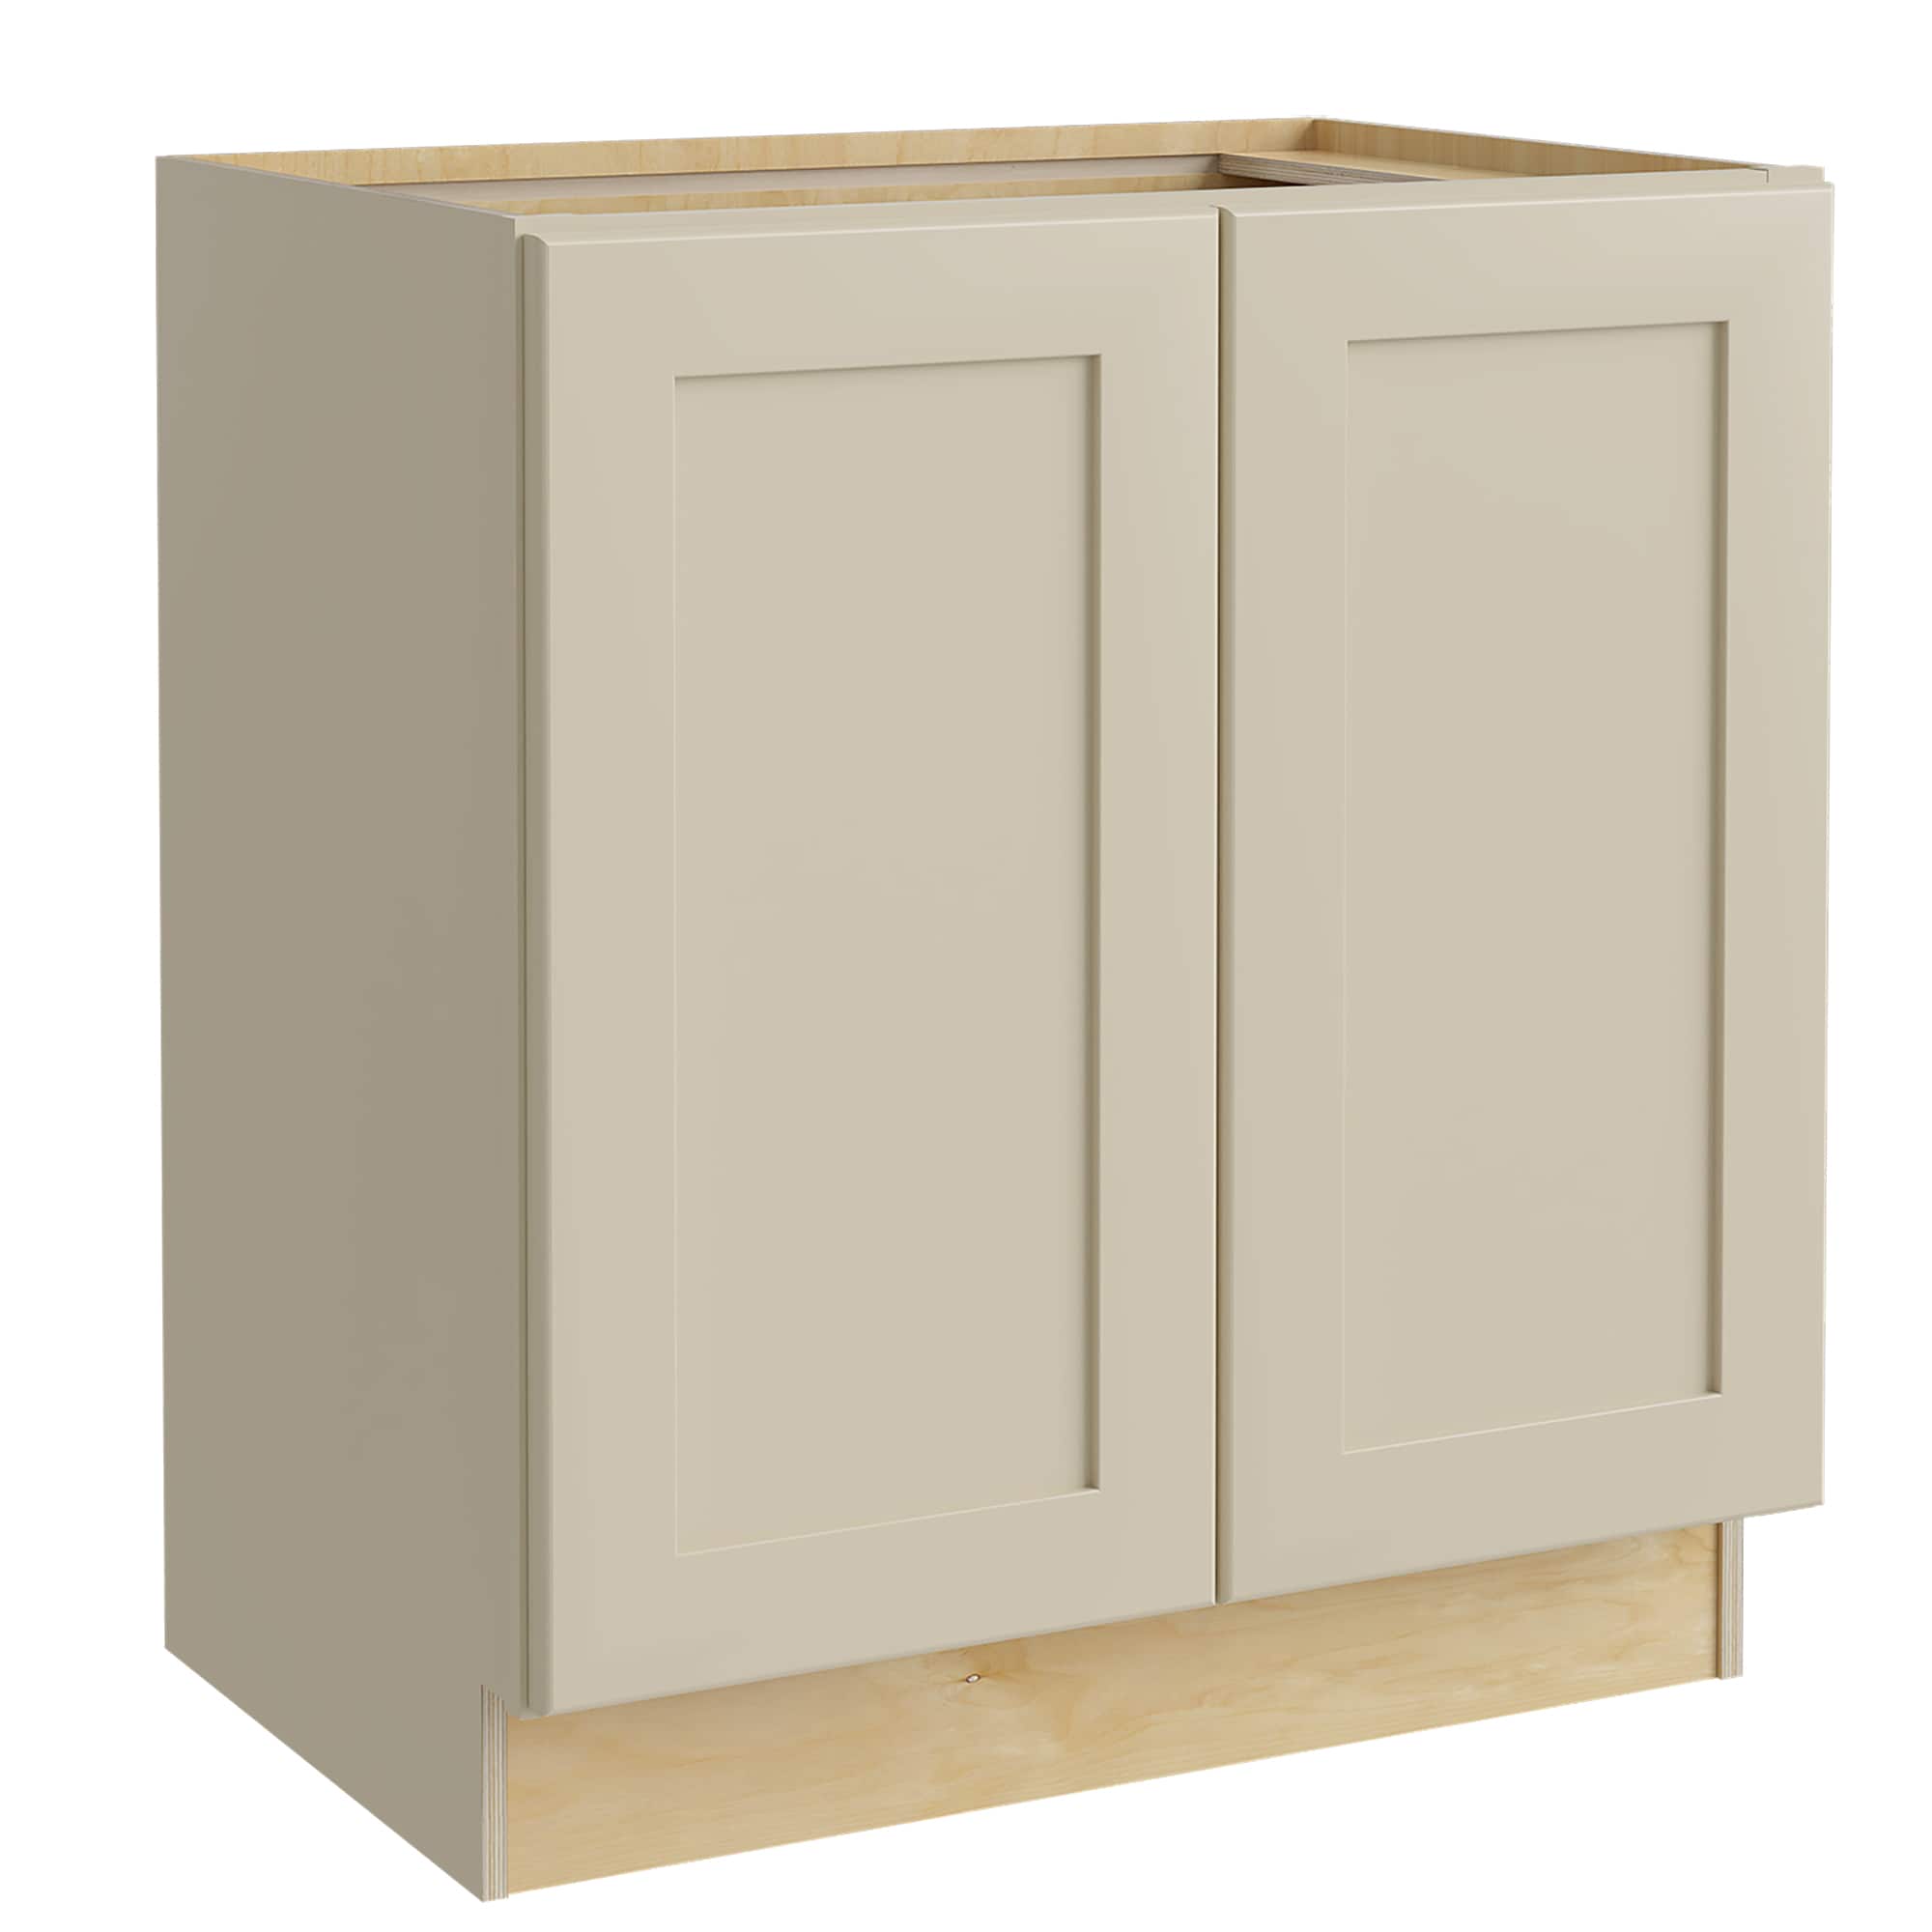 Luxxe Cabinetry 27-in W x 34.5-in H x 24-in D Norfolk Blended Cream Painted Door Base Fully Assembled Semi-custom Cabinet in Off-White | B27FH-NBC